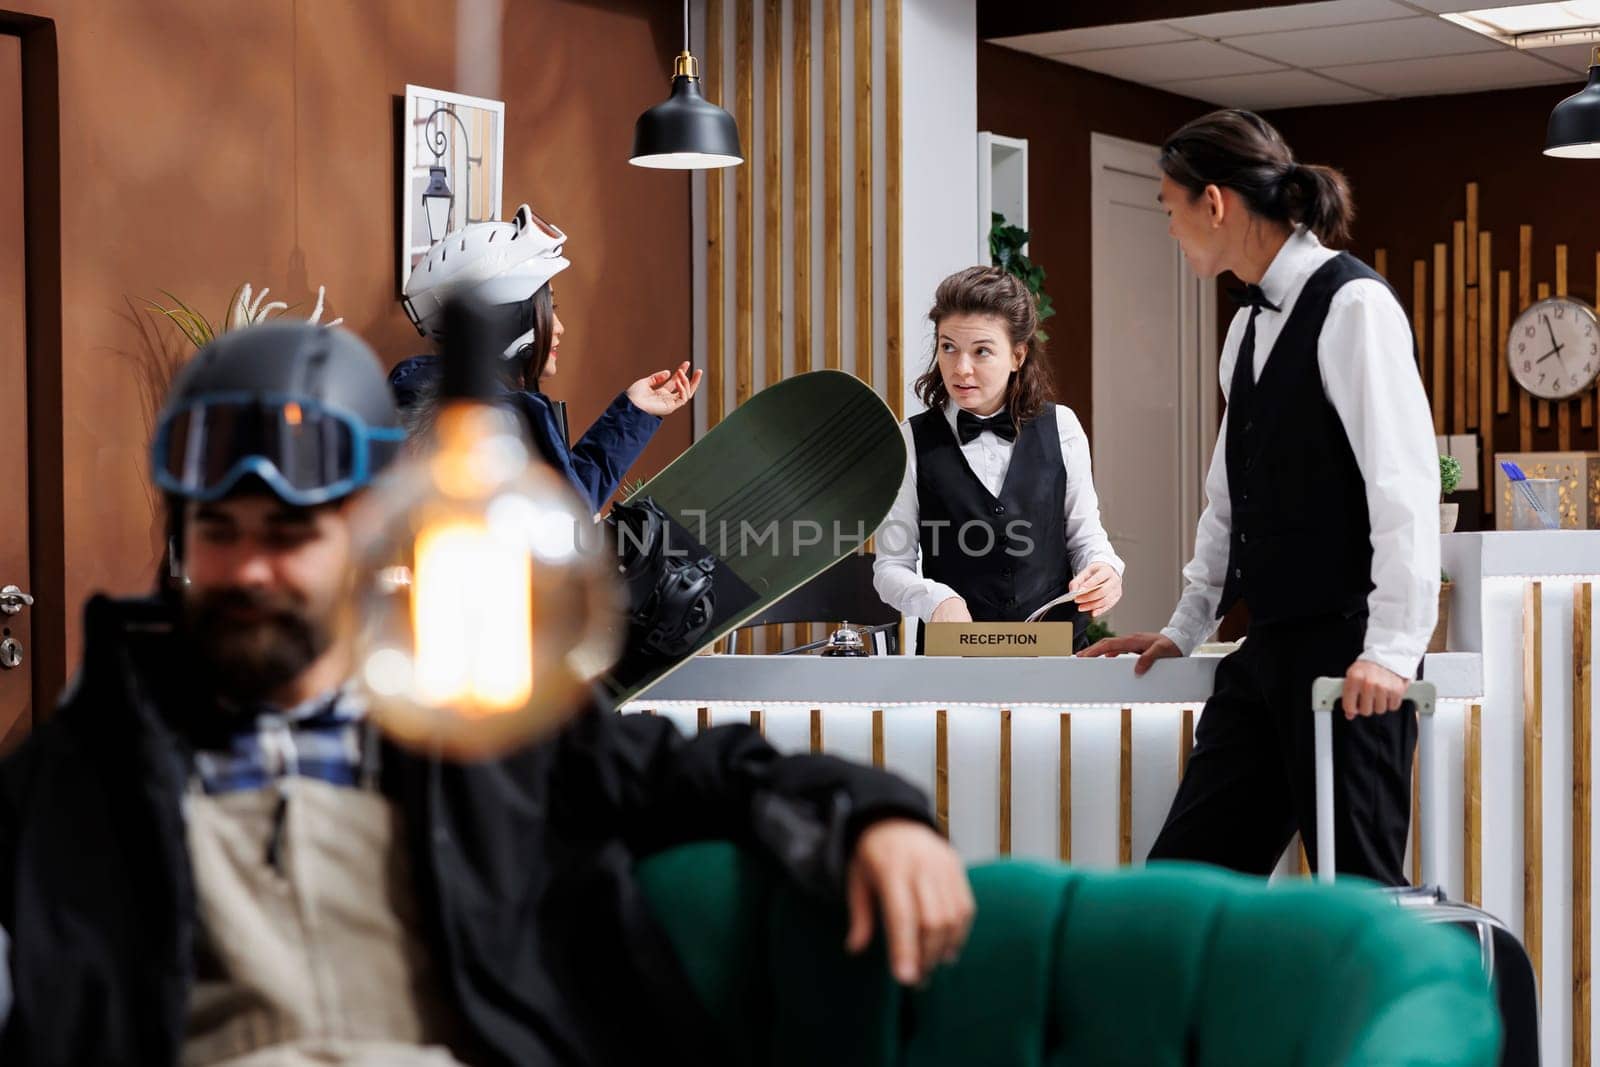 Arriving at hotel reception staff provides excellent service female guest while man sits on sofa waiting for hotel room. Winter gear and ski equipment hints a thrilling winter holiday at ski resort.